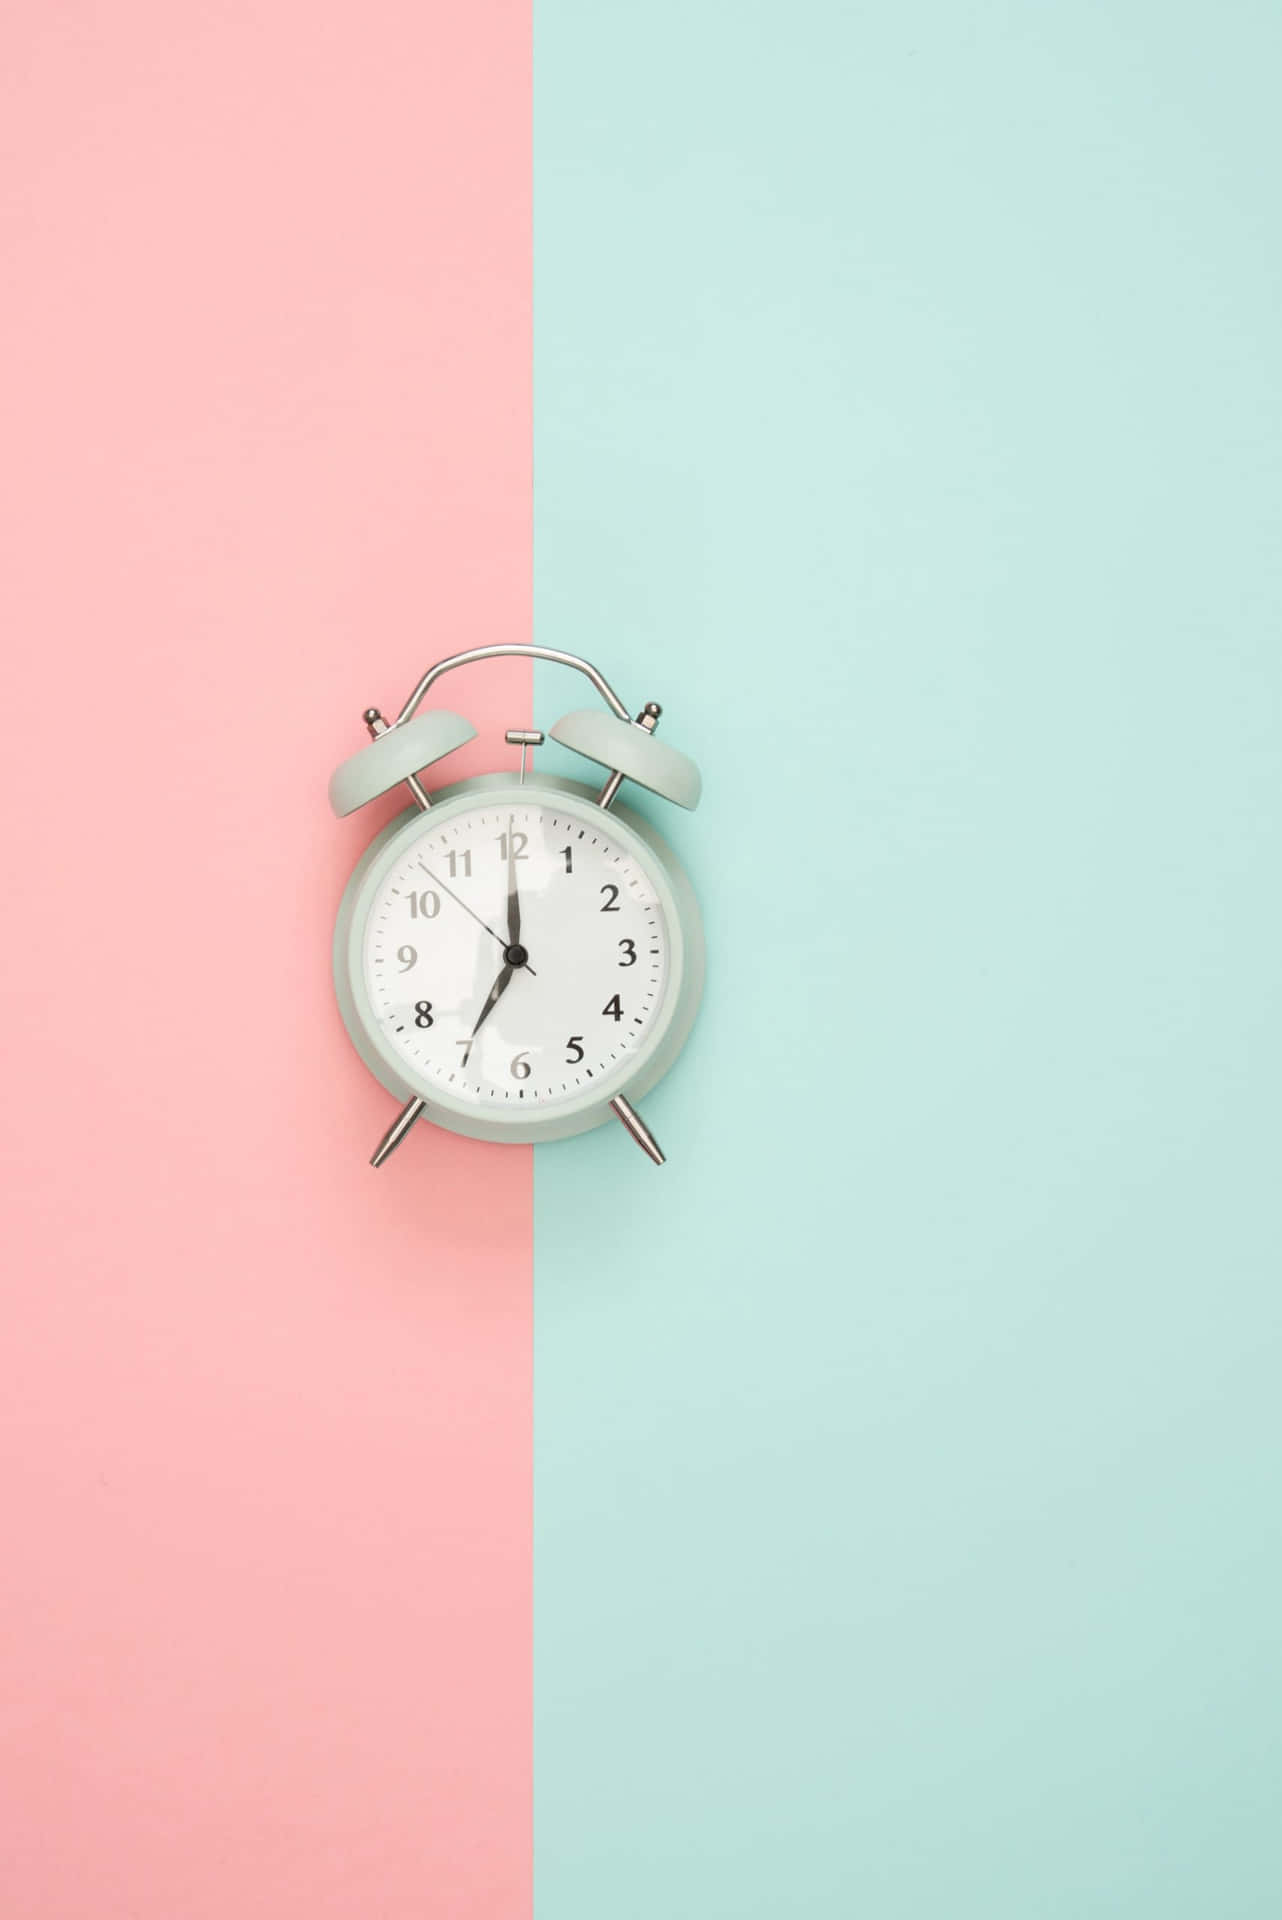 Blue And Pink Alarm Clock Background